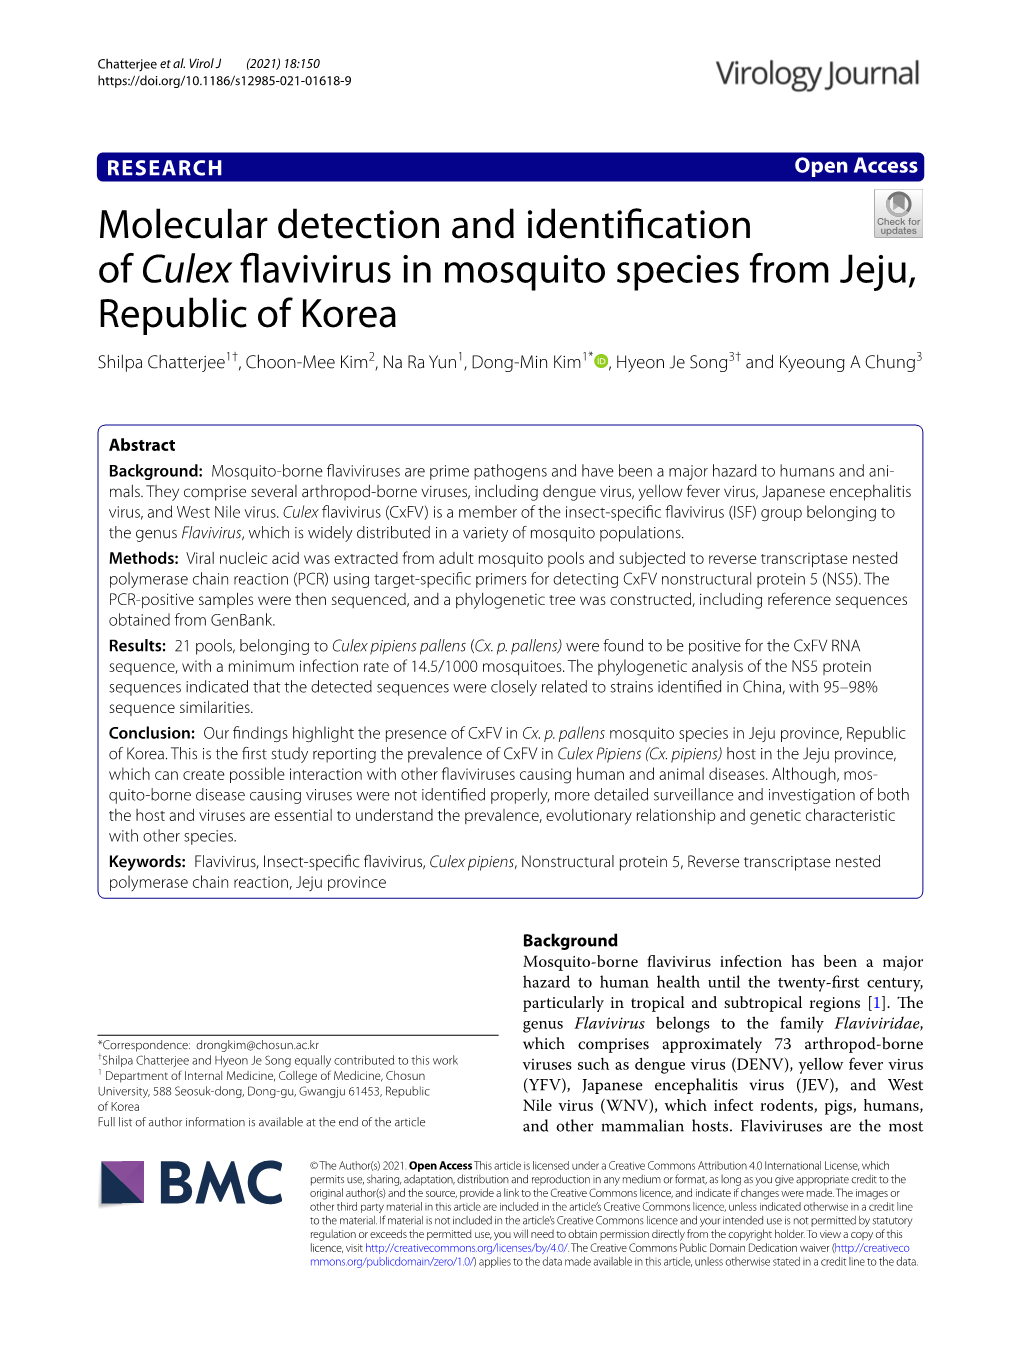 Molecular Detection and Identification Of